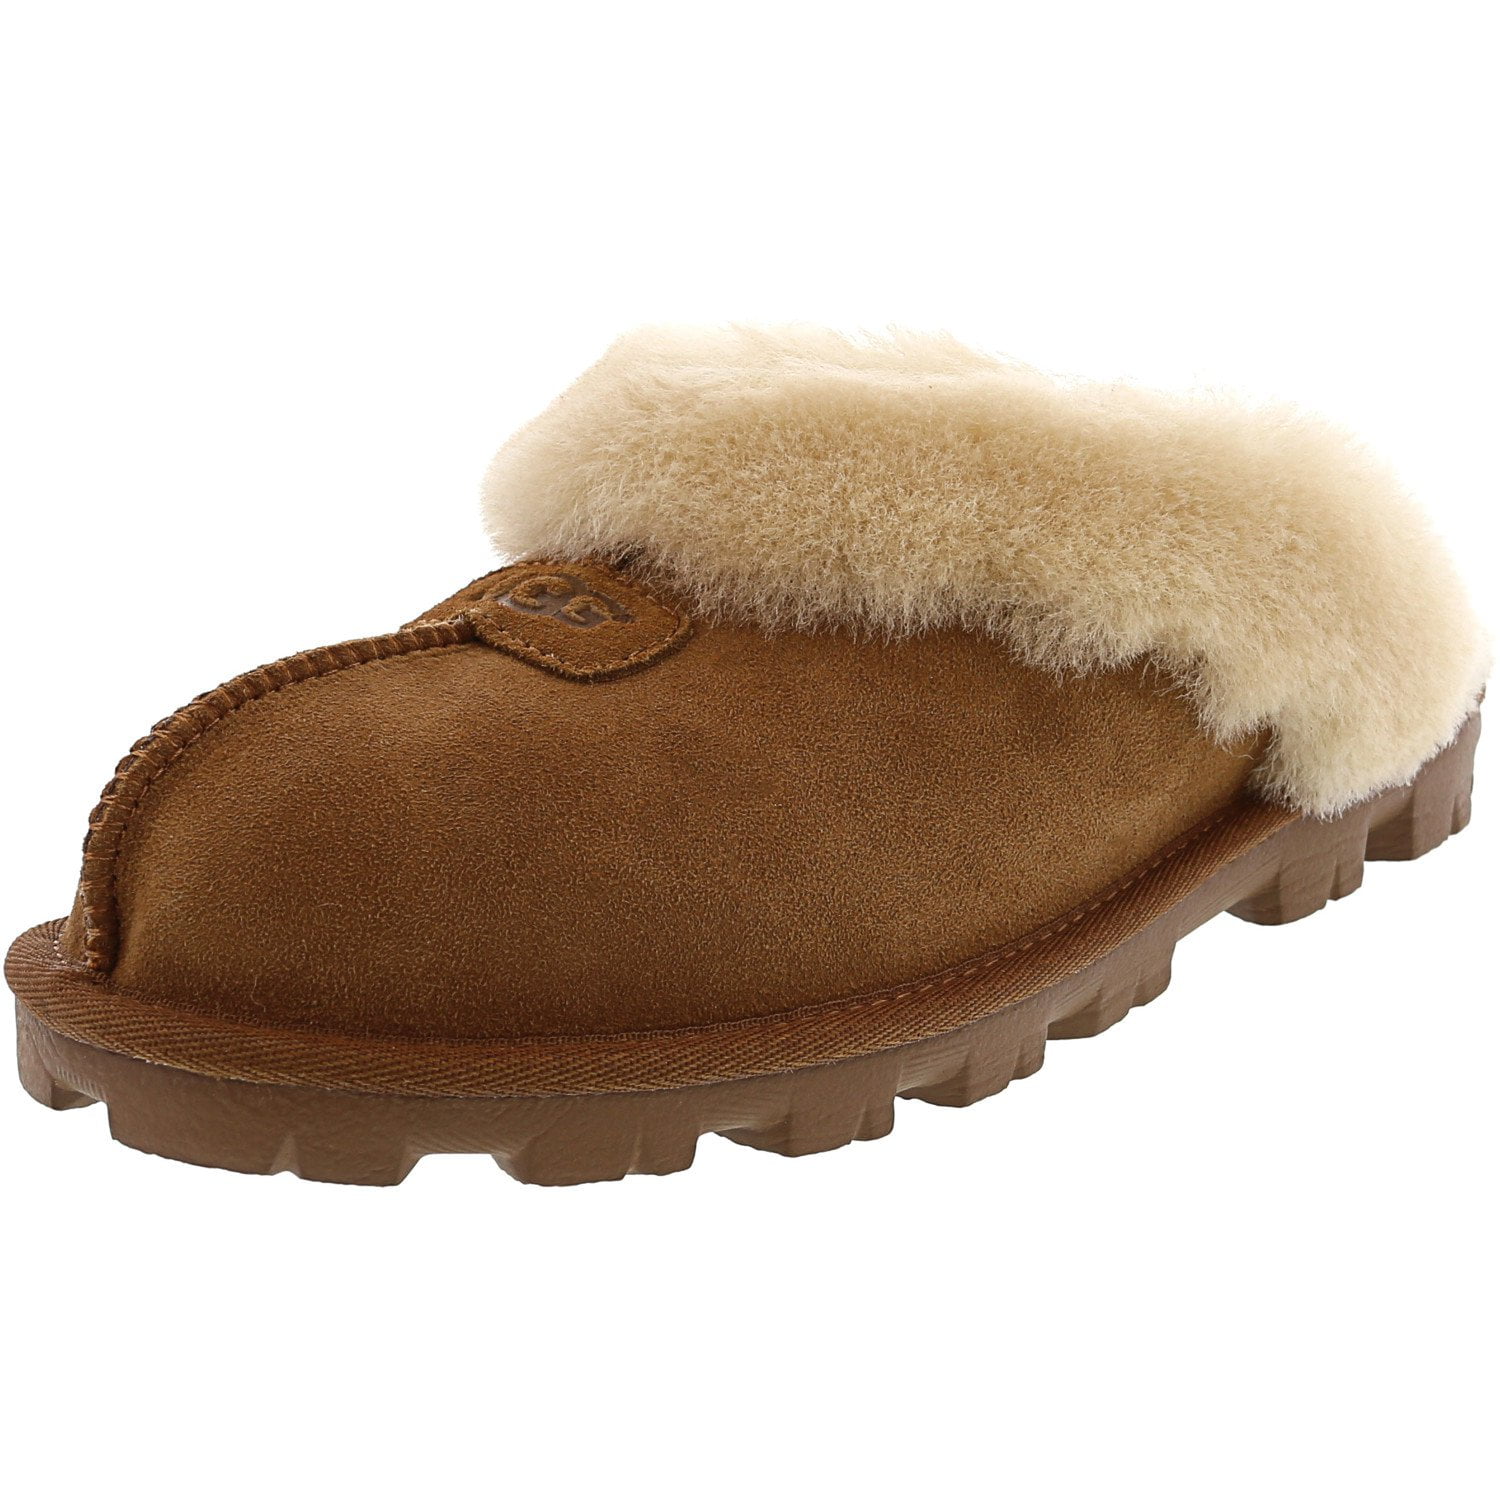 ugg slippers size 7